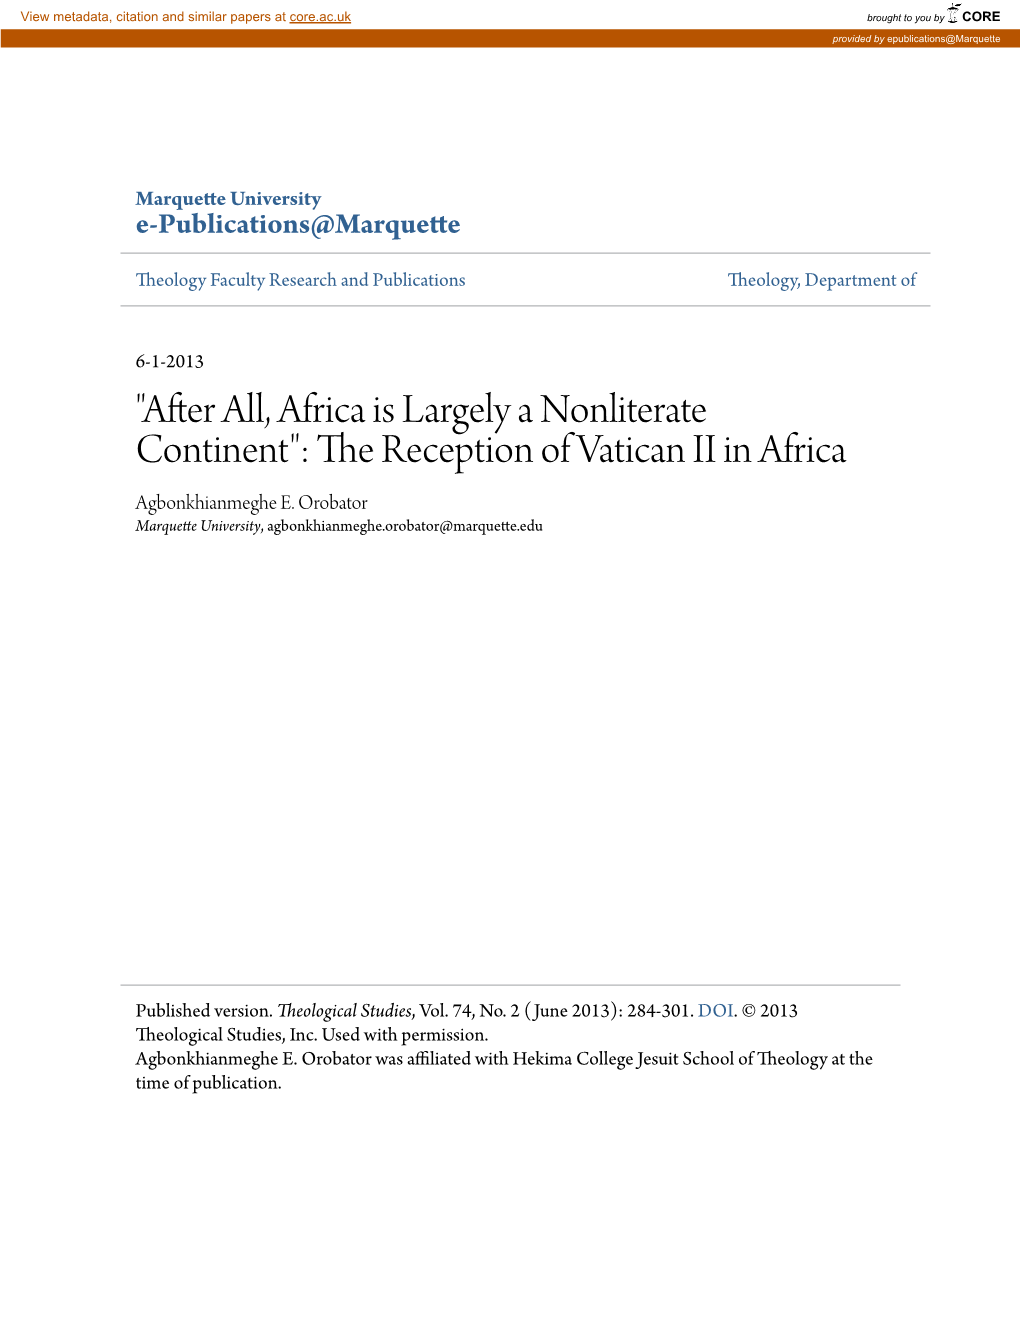 The Reception of Vatican II in Africa Agbonkhianmeghe E